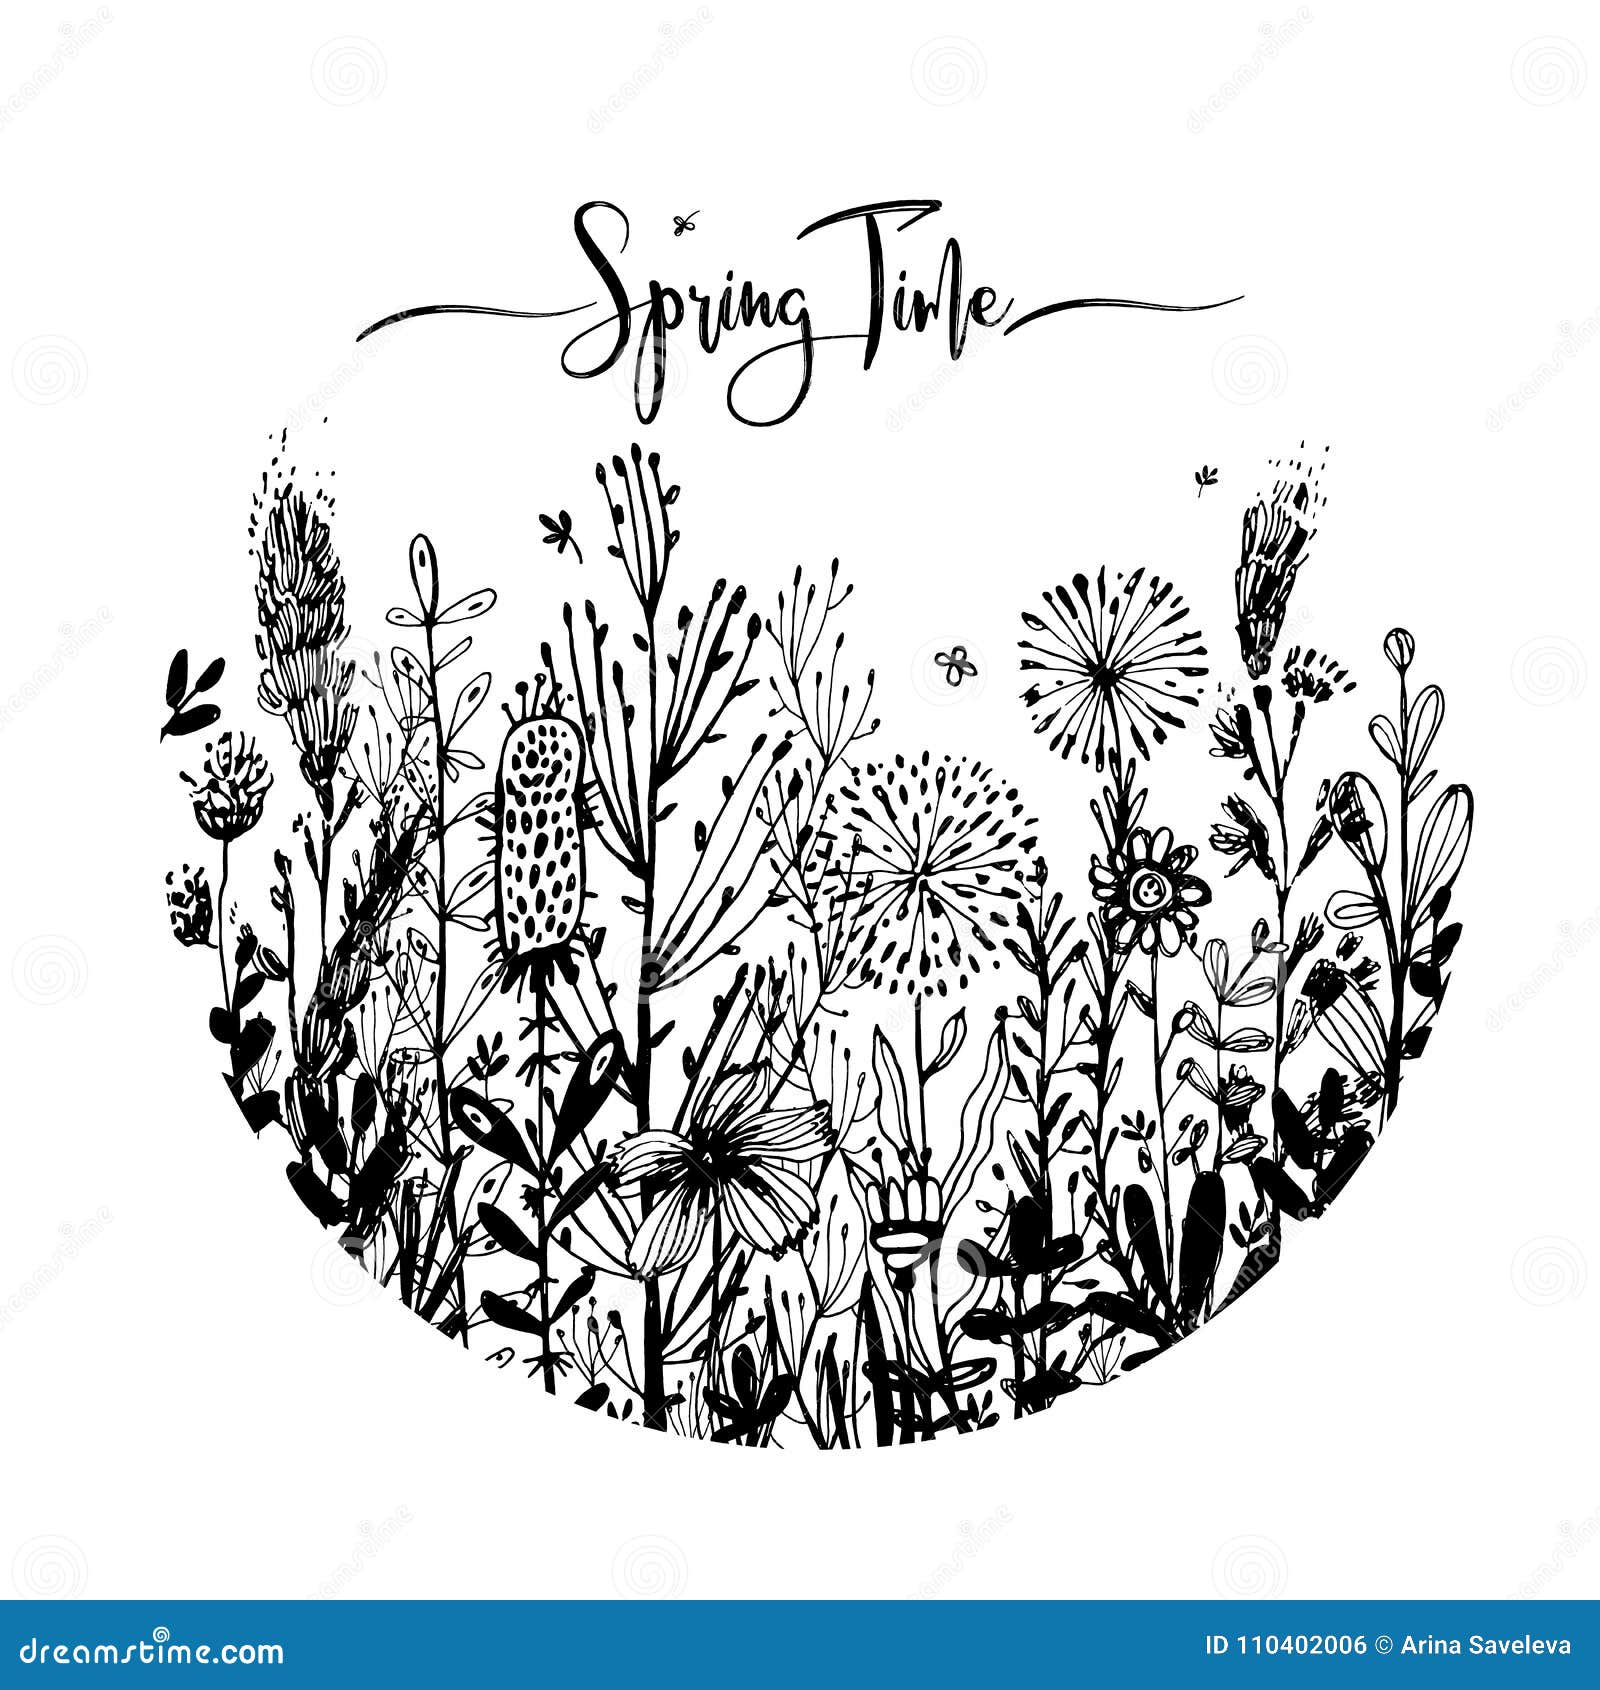 spring time wording with hand drawn flowers in a circle, set of black doodle s, grass, leaves, flowers. 